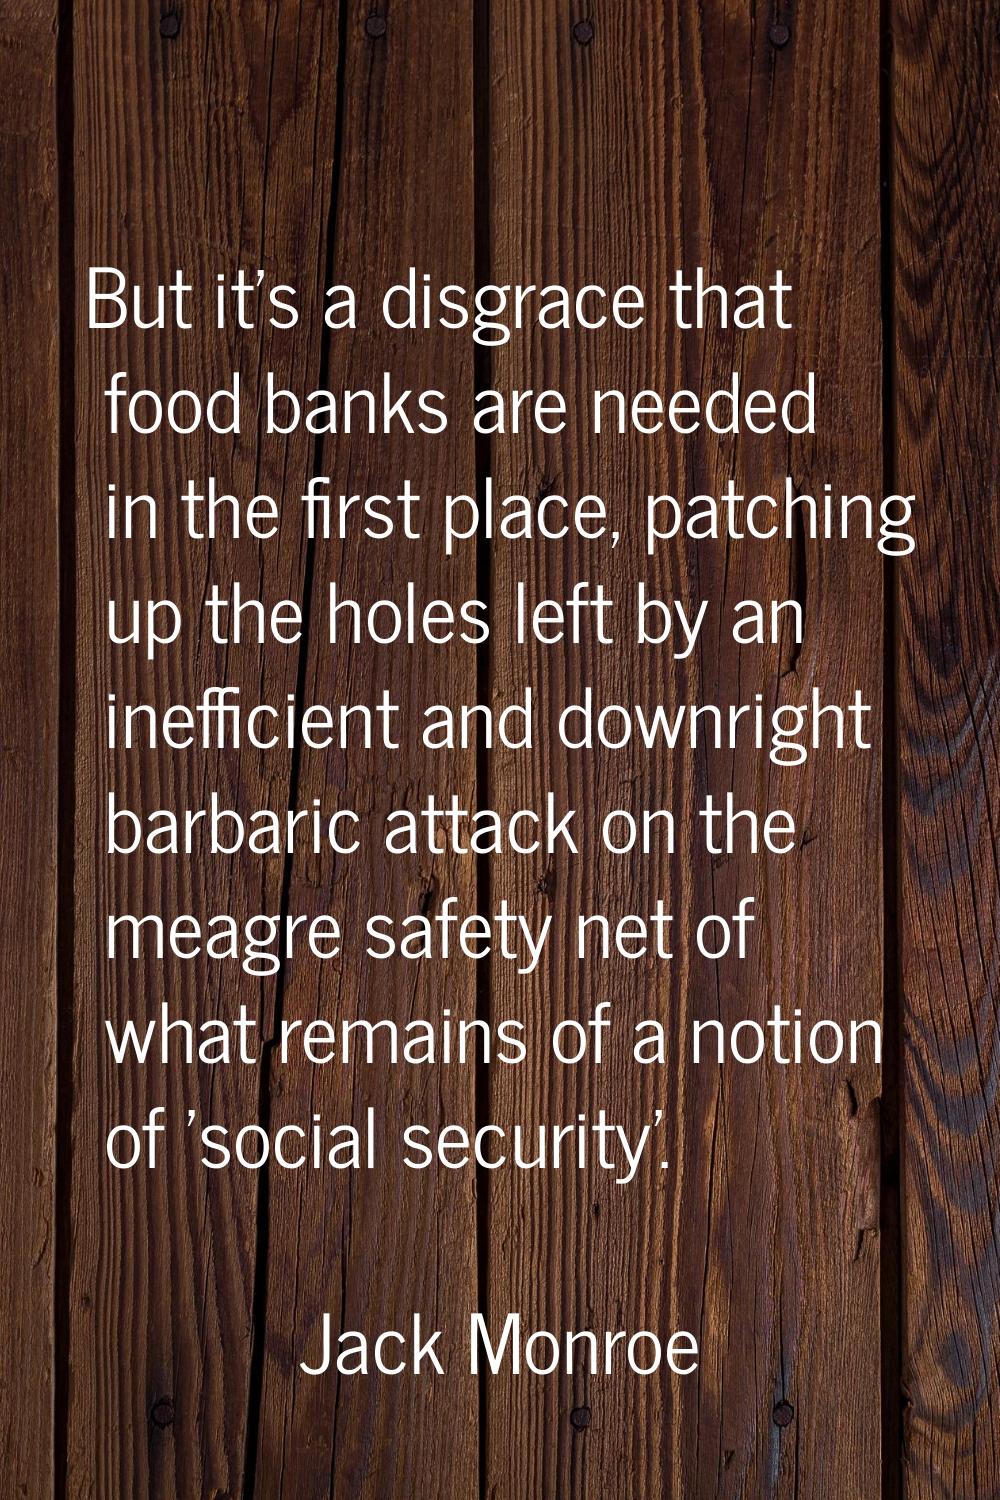 But it's a disgrace that food banks are needed in the first place, patching up the holes left by an